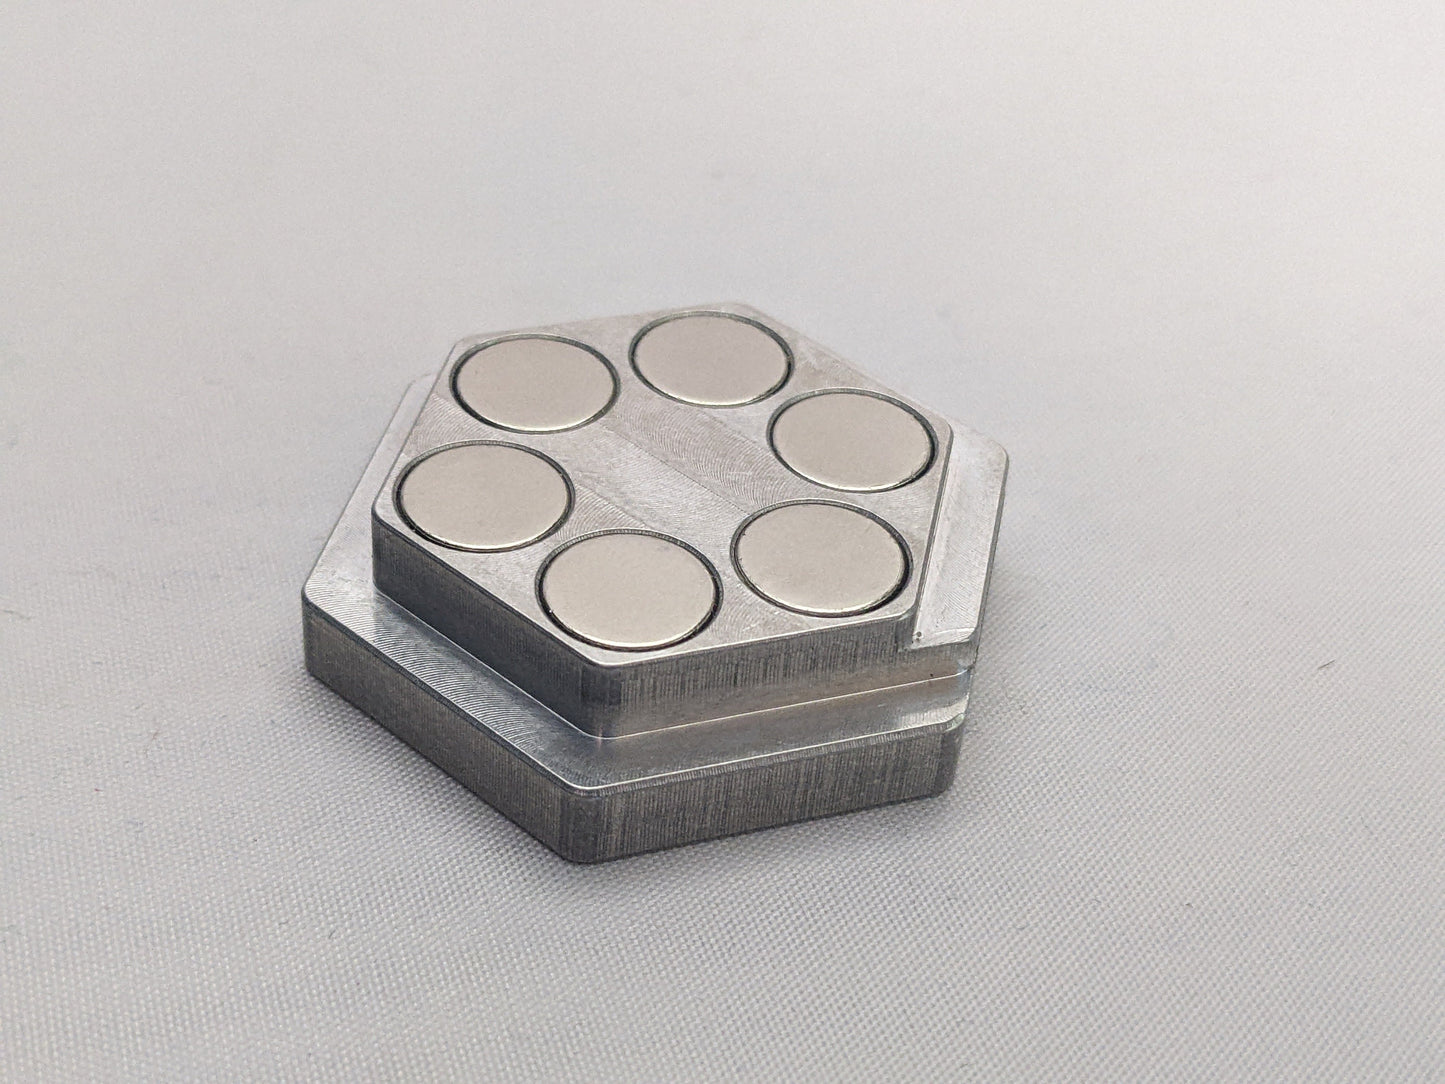 Compact Hex Metal Magnetic Hold Downs for Laser Cutting - Optimized for Glowforge and Thunder Laser Machines - Durable Aluminum - USA-Made